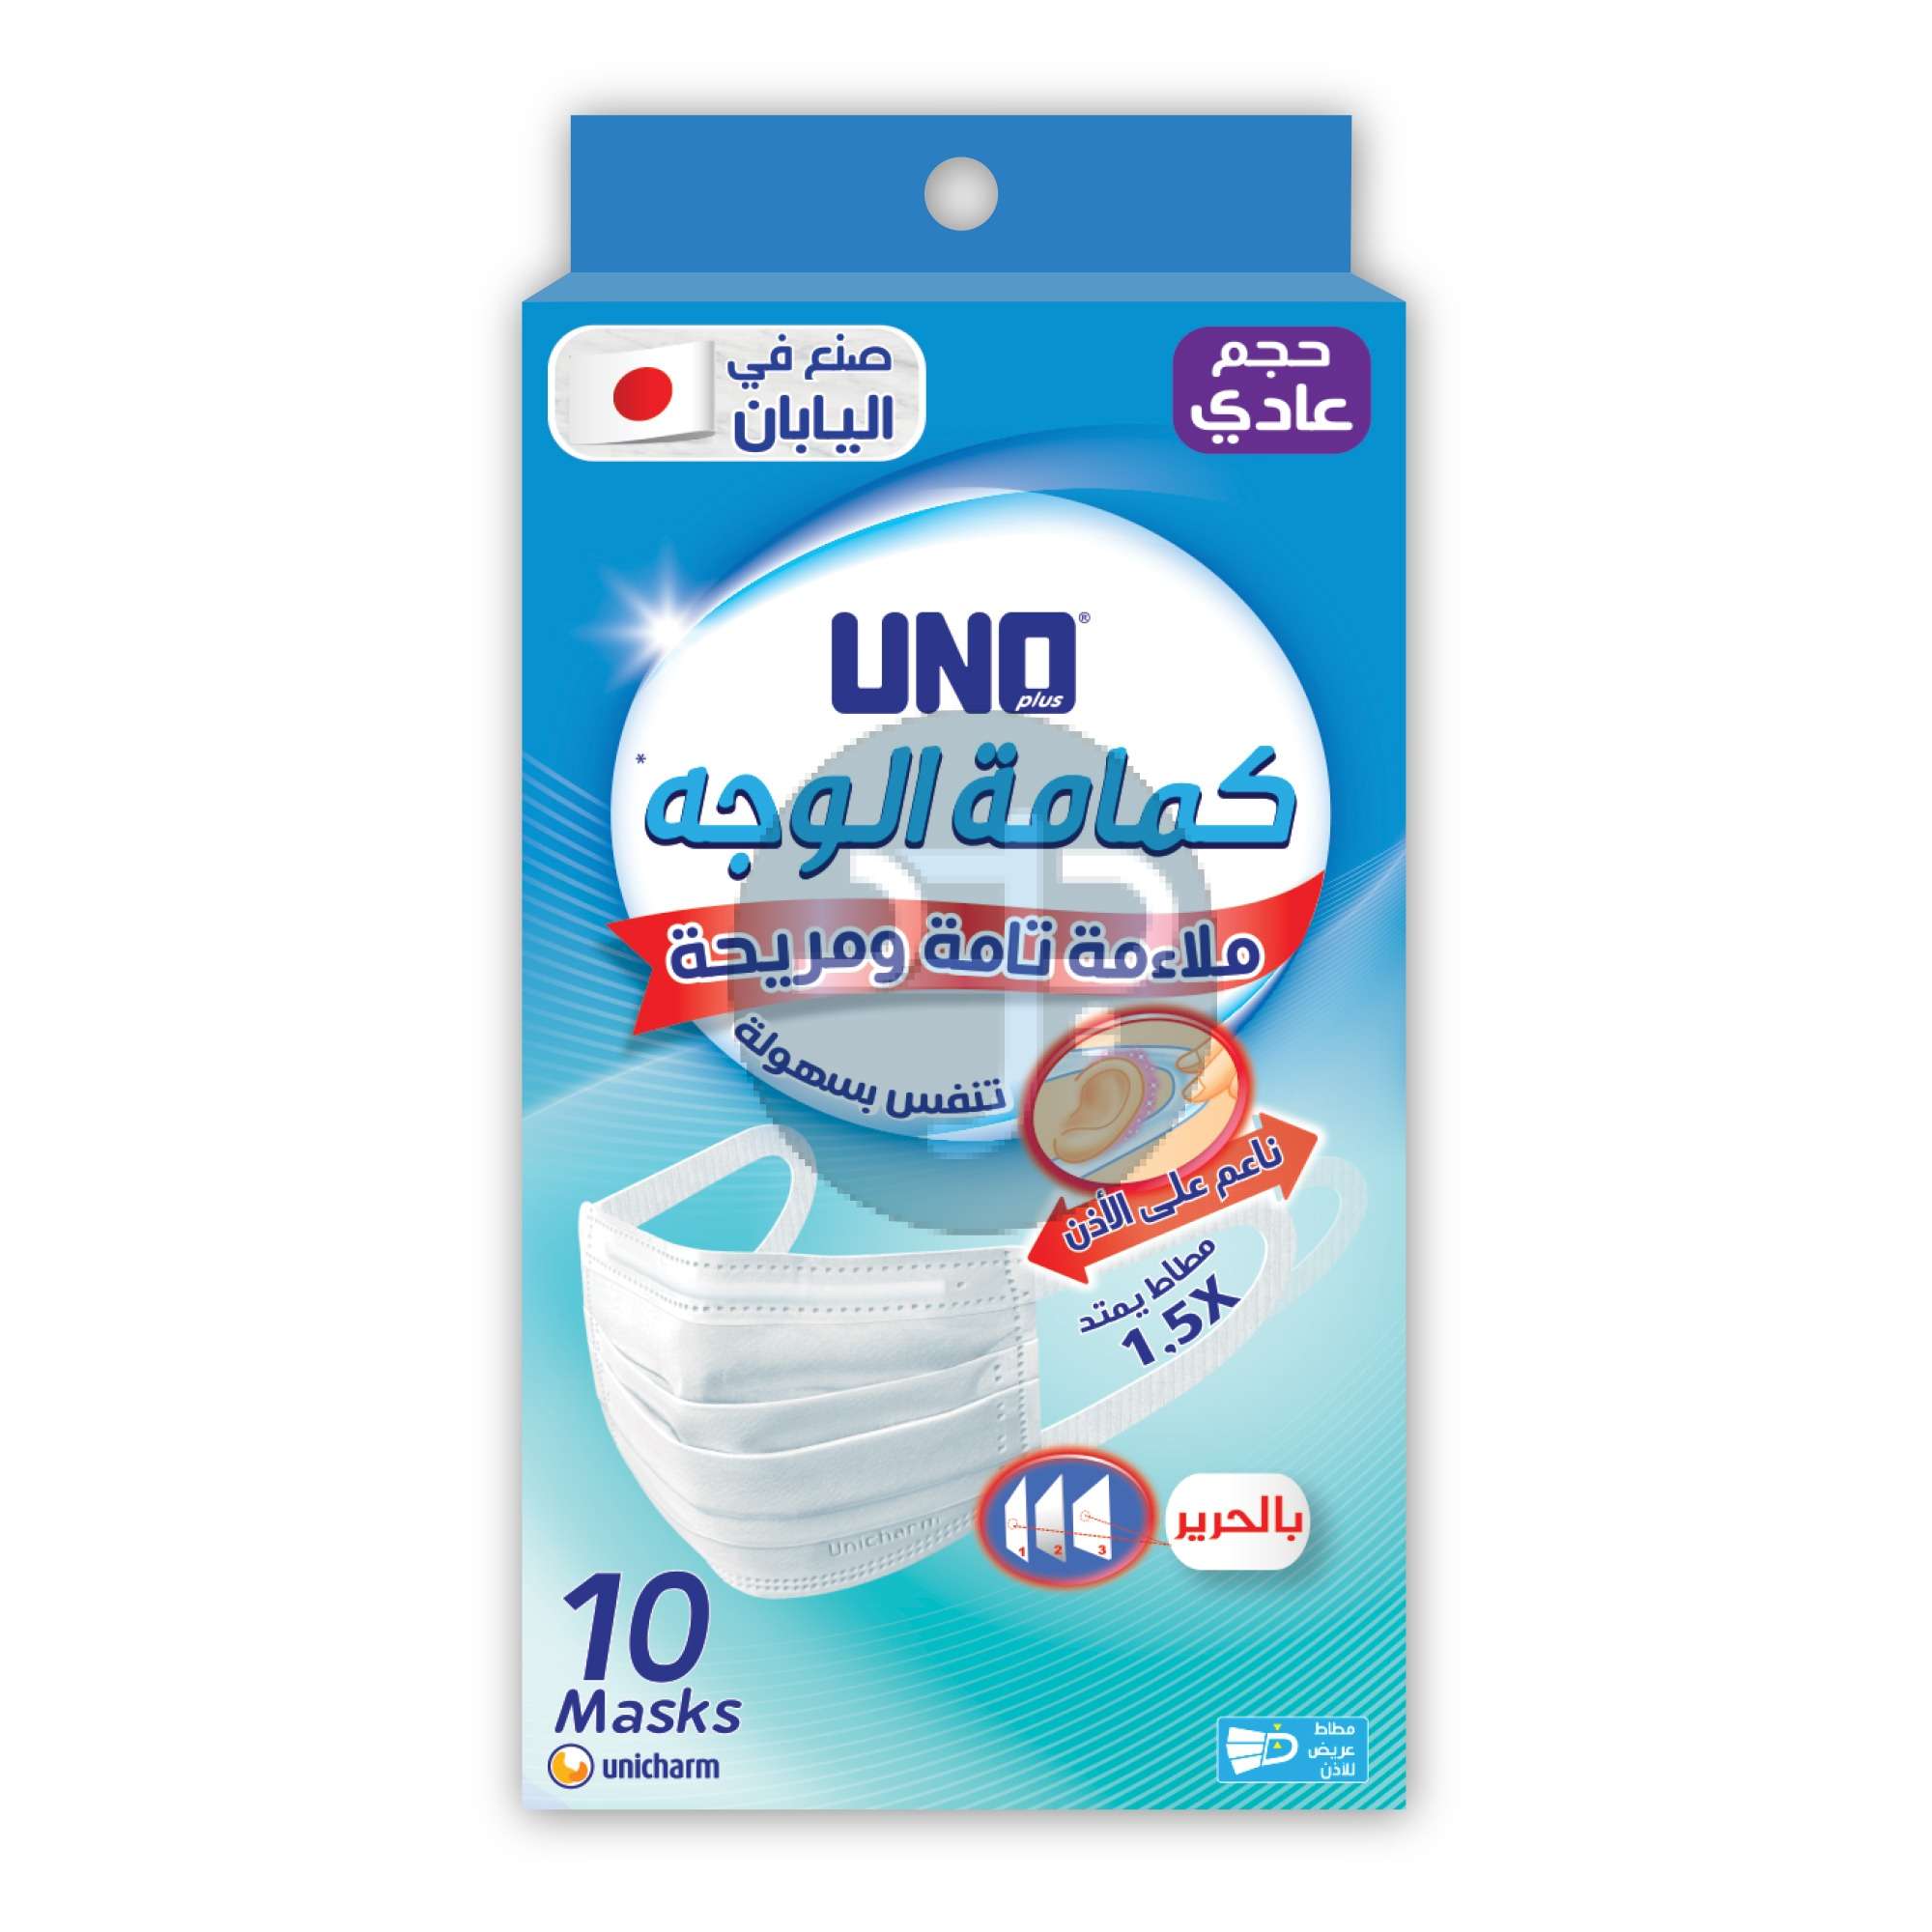 Product-UNO Plus Face Mask, Regular Size , Pack of 10 Masks